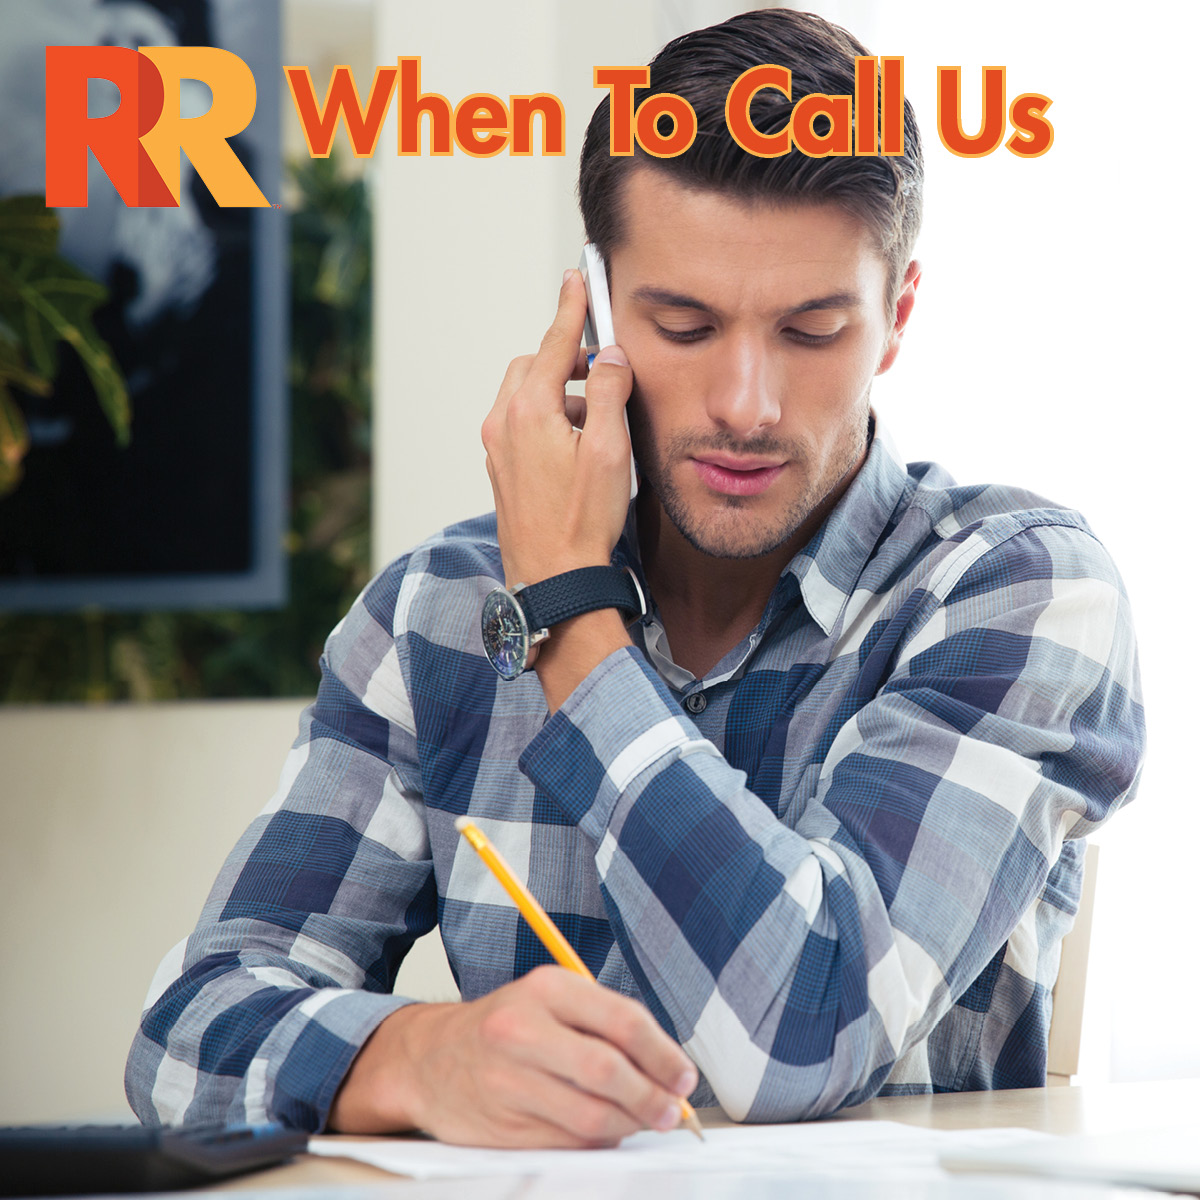 When to Call RRPS About A COVID-19 Related Incident